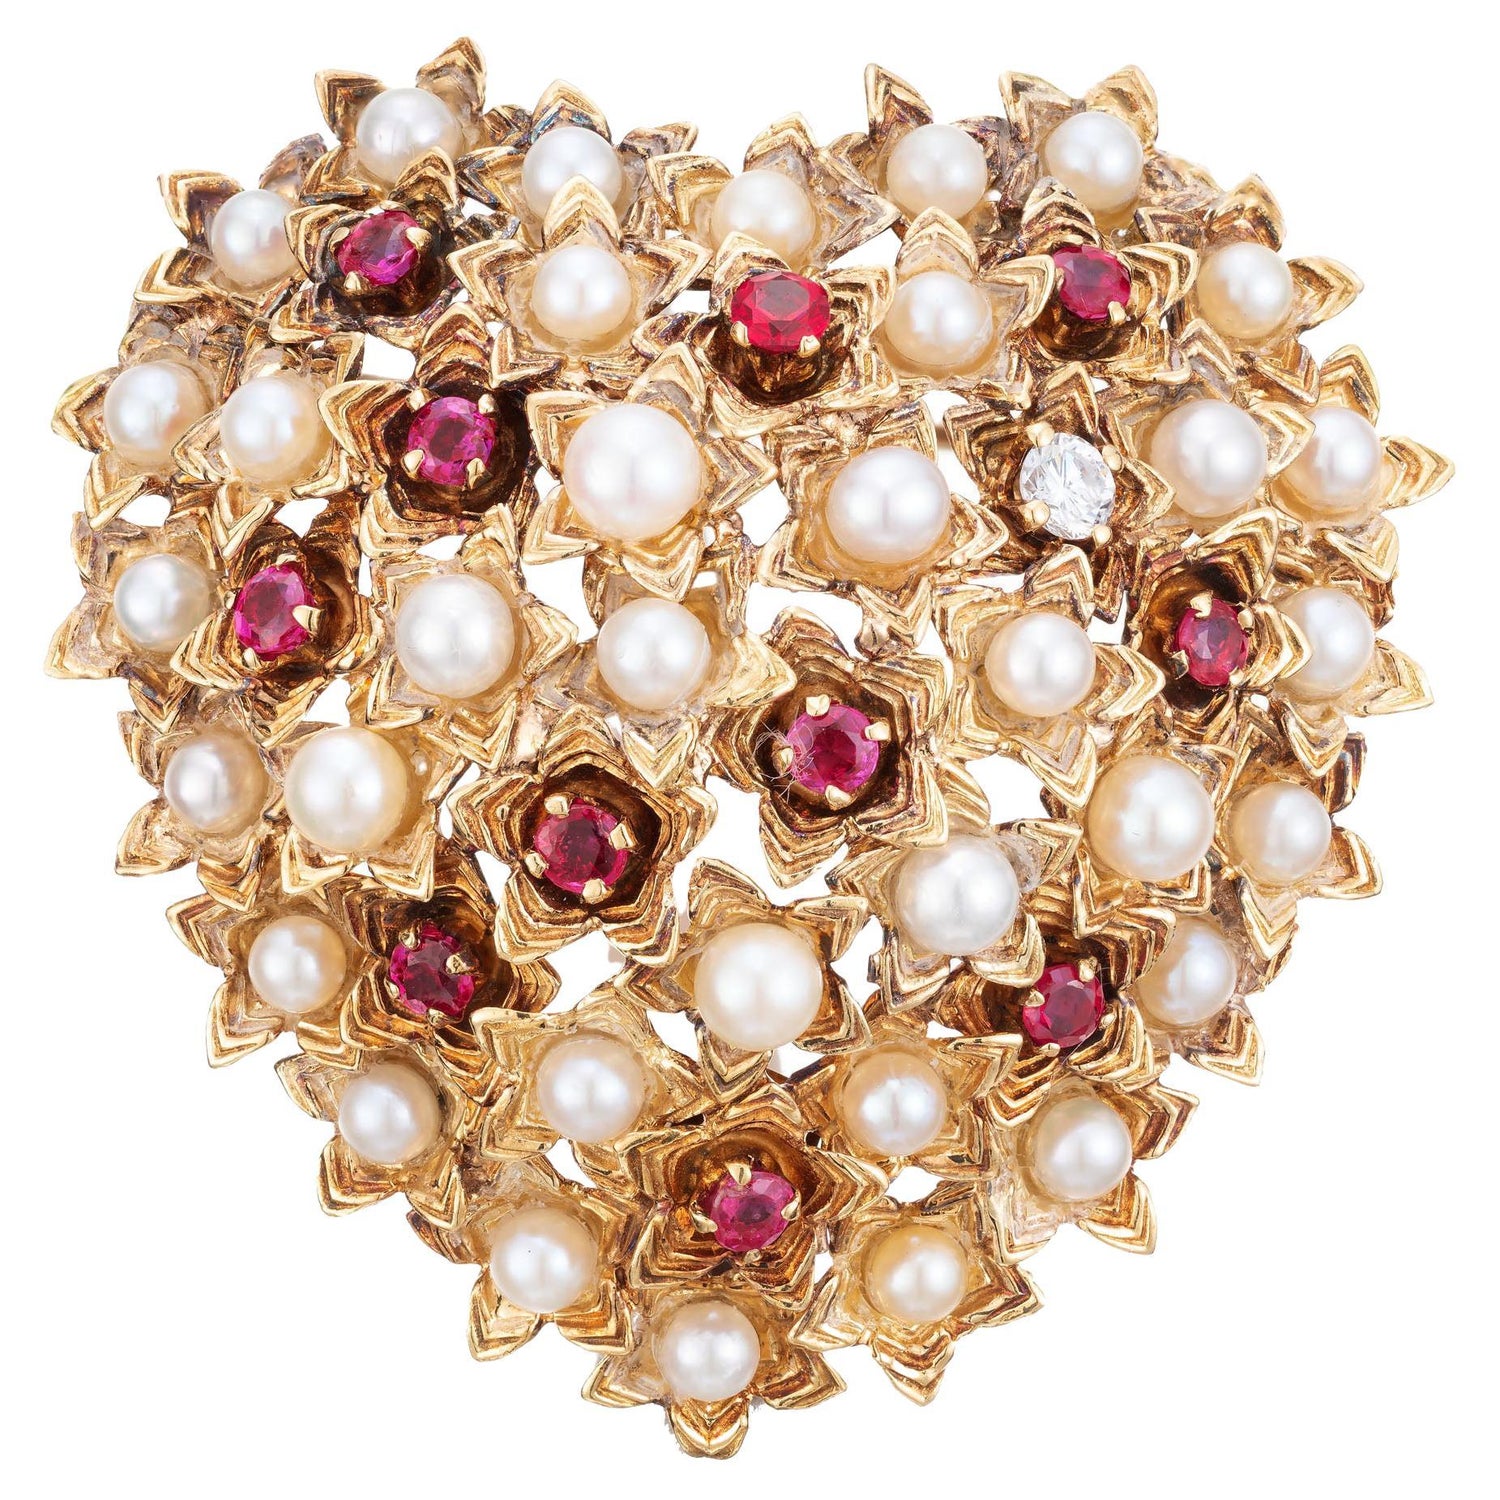 Sold at Auction: Gold, Cultured Pearl and Diamond Ballerina Brooch, Tiffany  & Co.